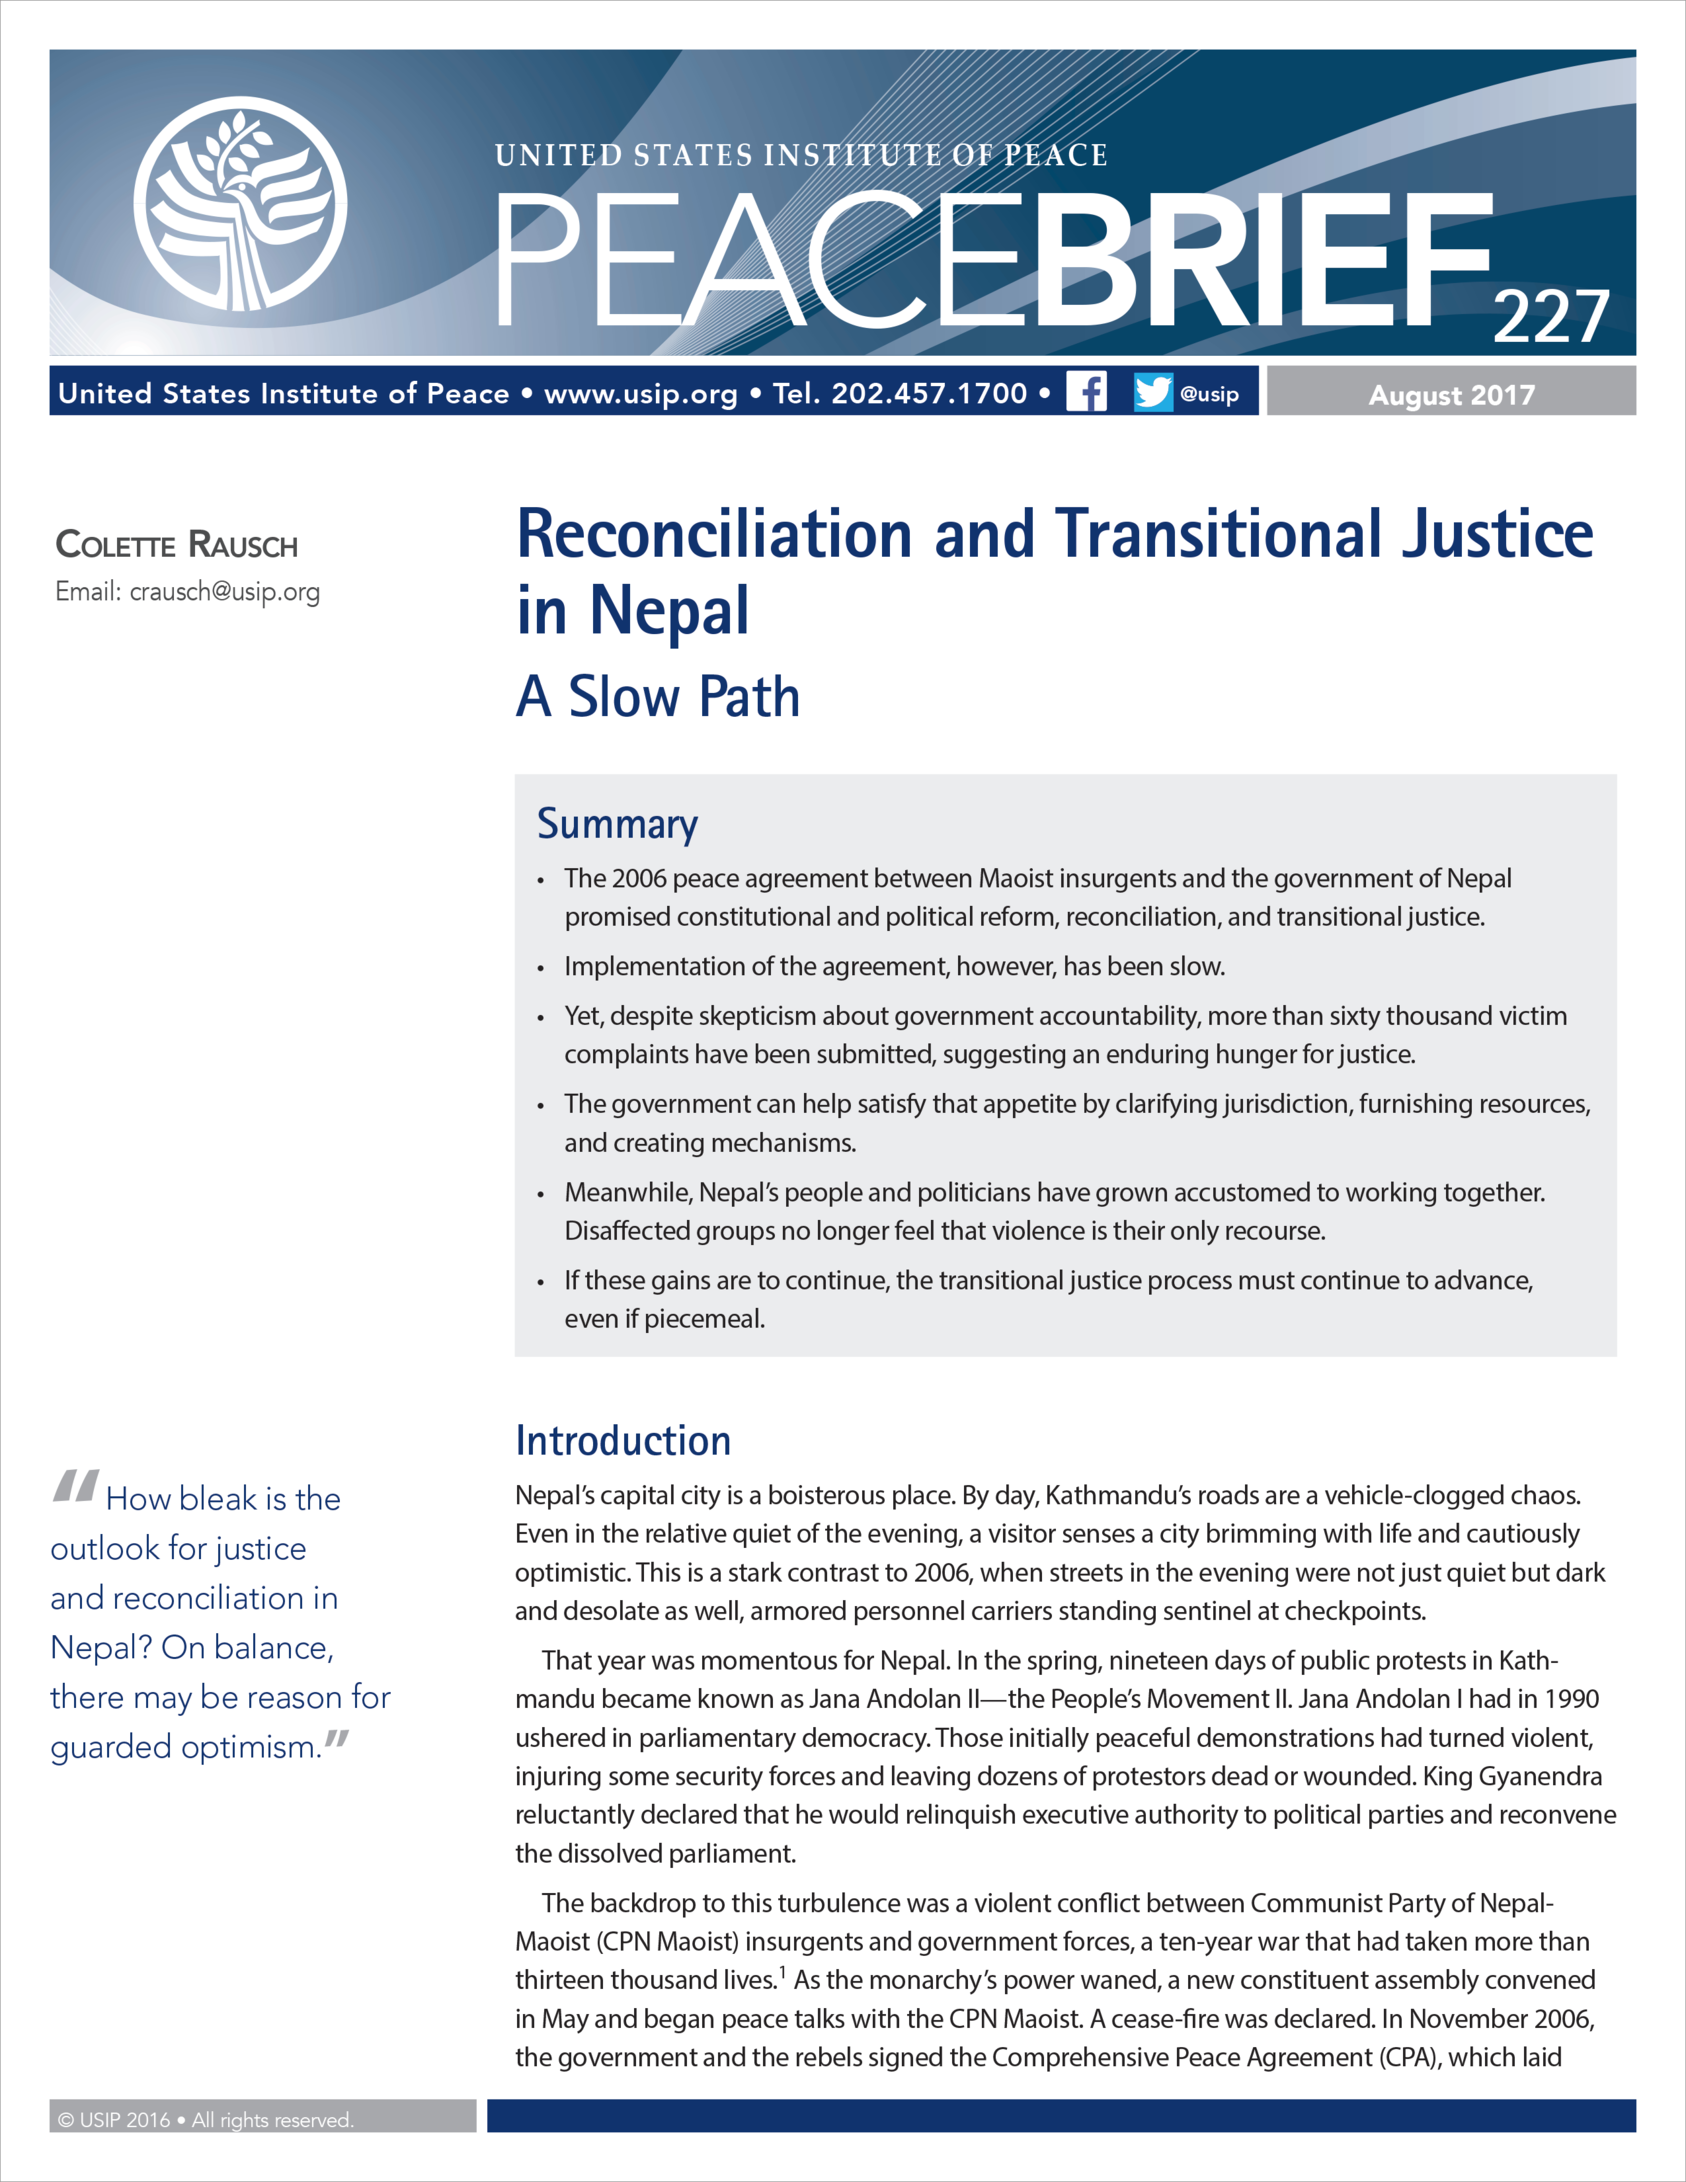 How South Africa's Focus on Reconciliation Undermined Justice